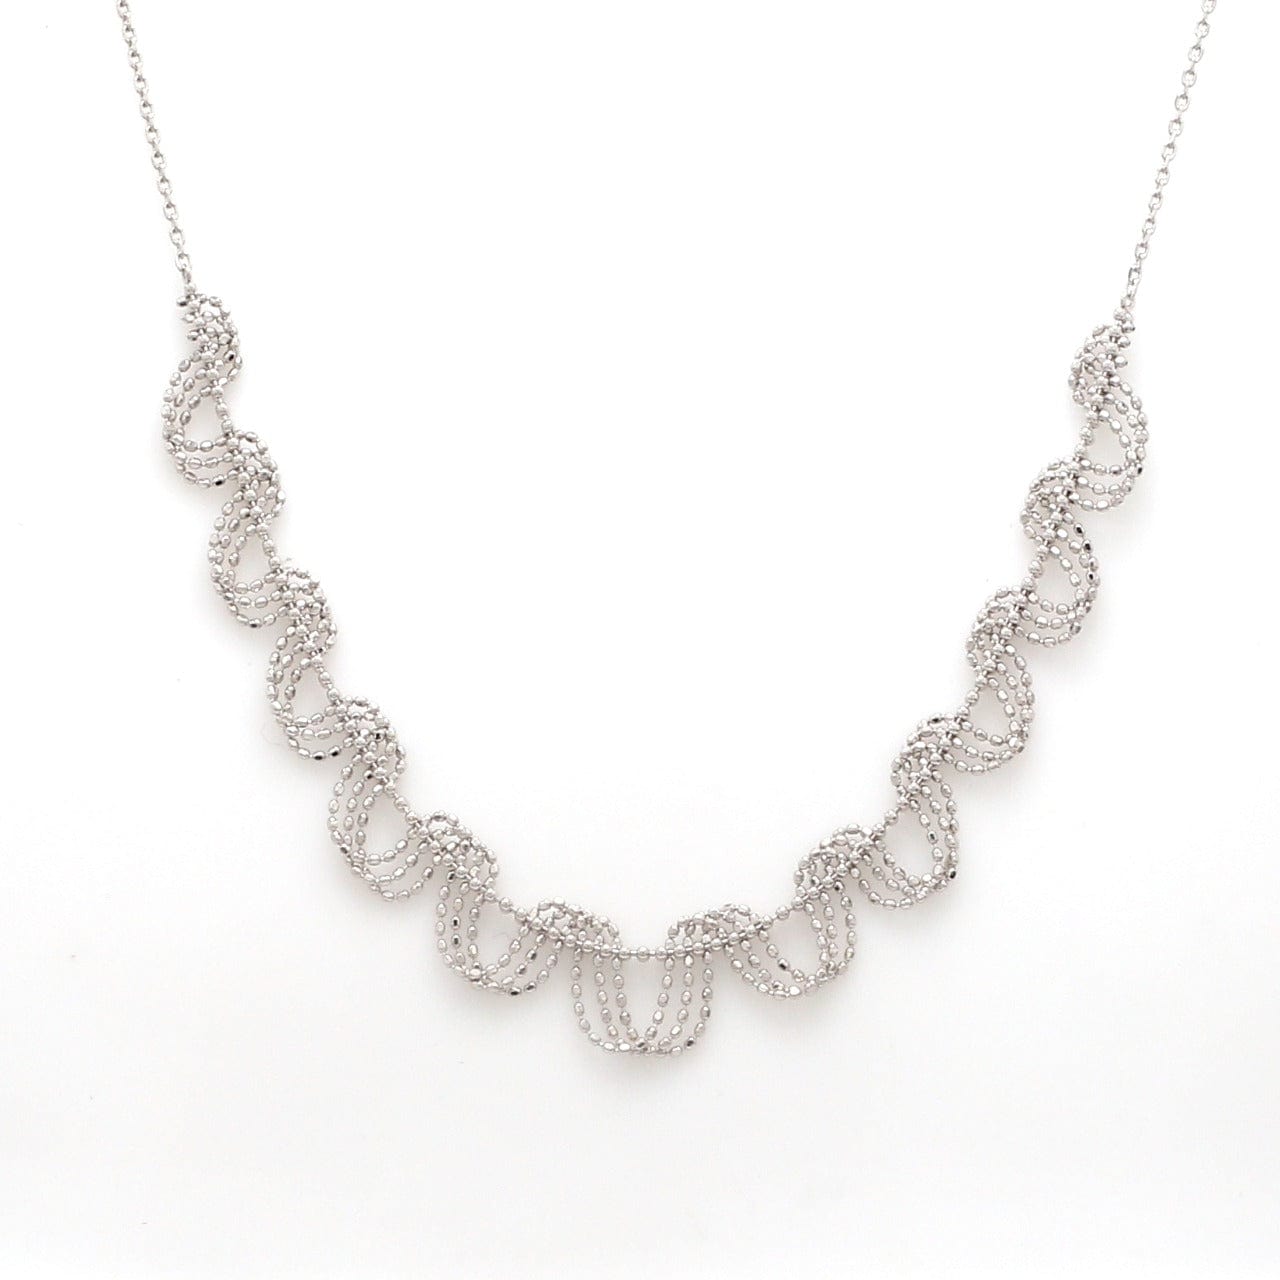 Voiage Private Label | White Gold Diamond Button Necklace at Voiage Jewelry